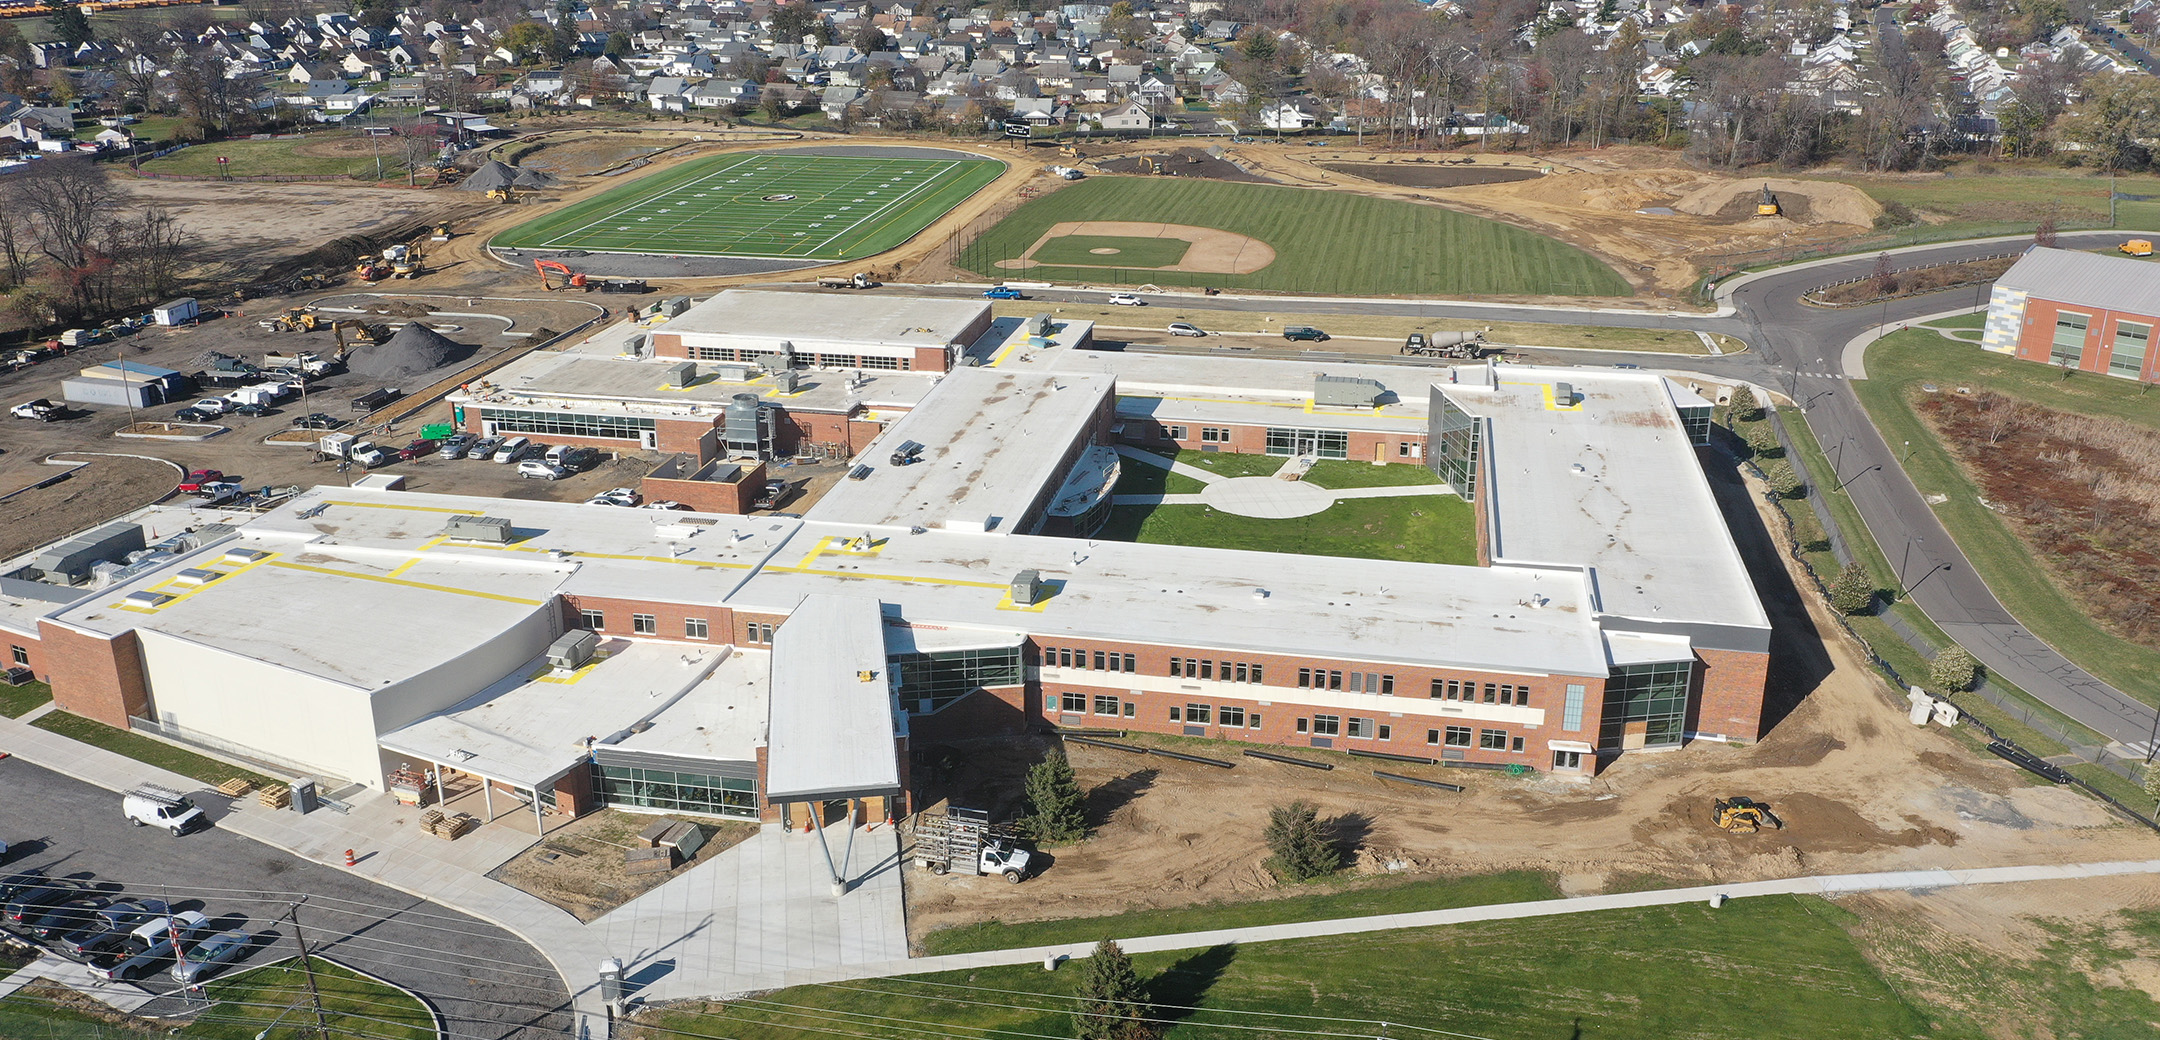 An aerial view of the active construction site of the Ben Franklin Middle School